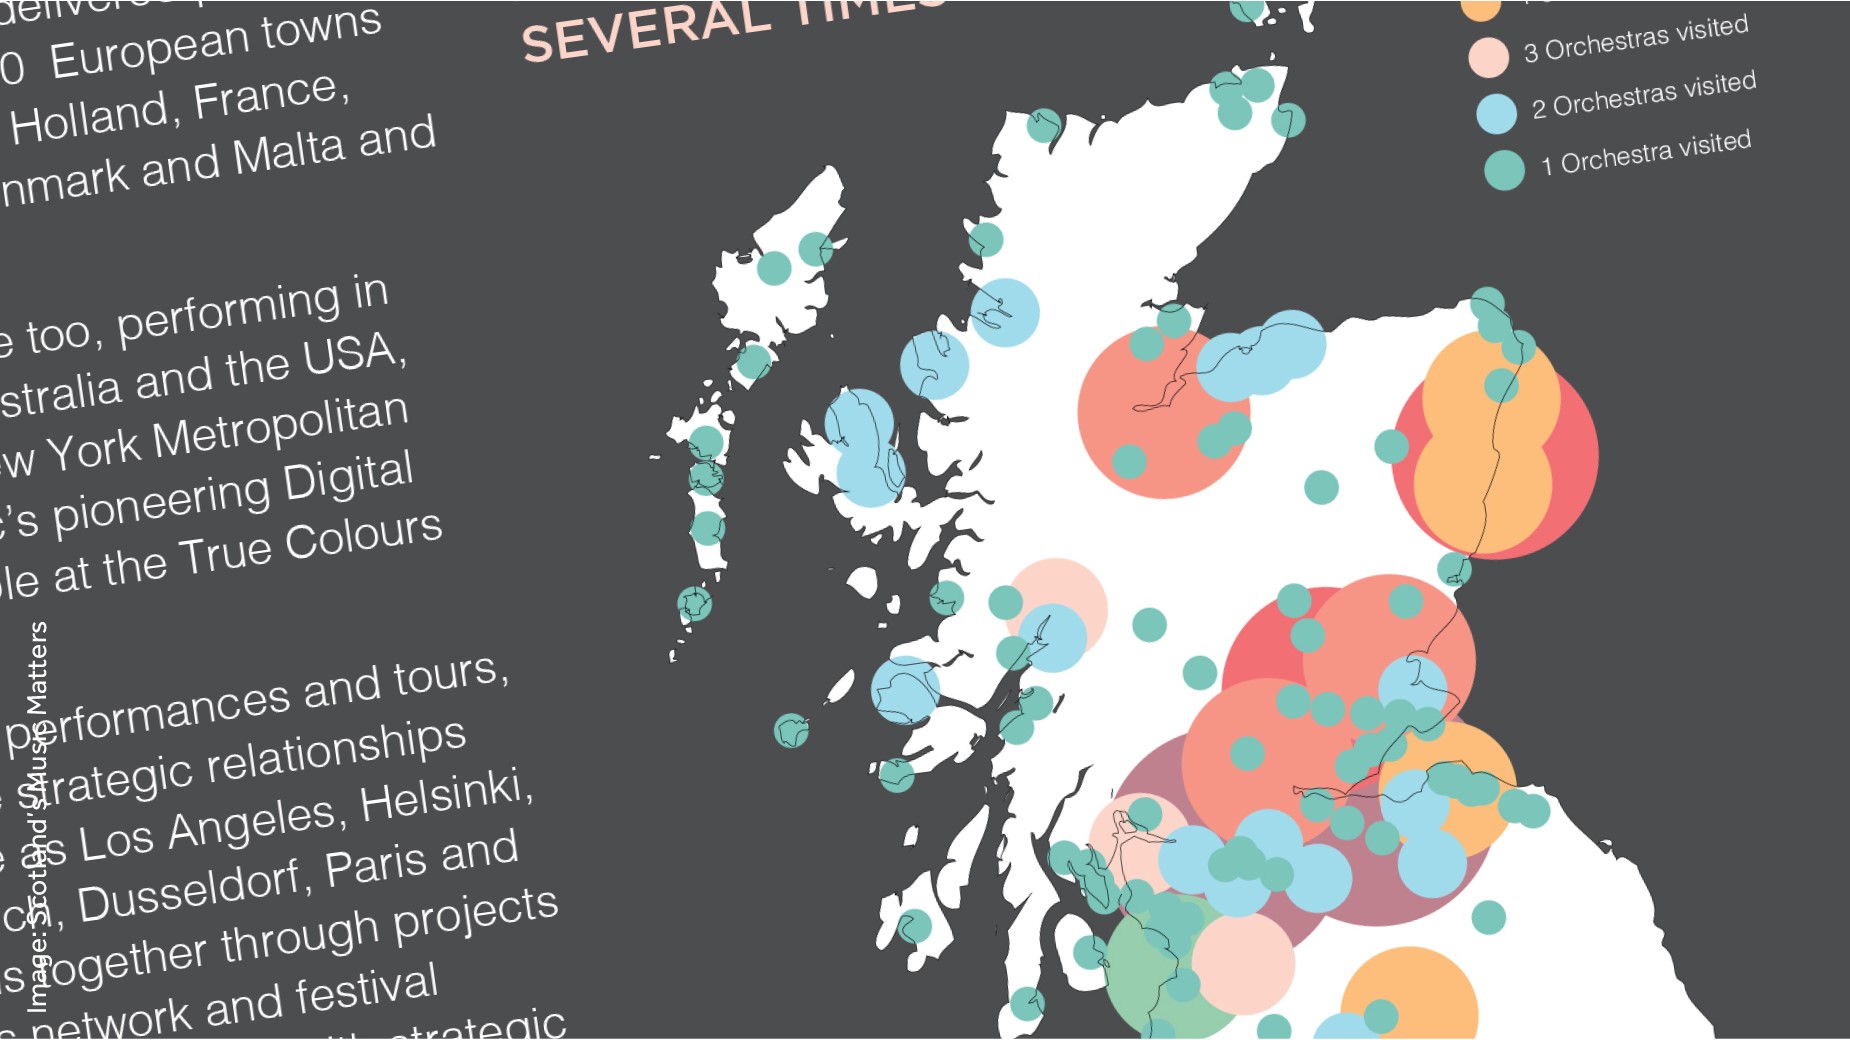 Graphic of Scotland showing classical music provision